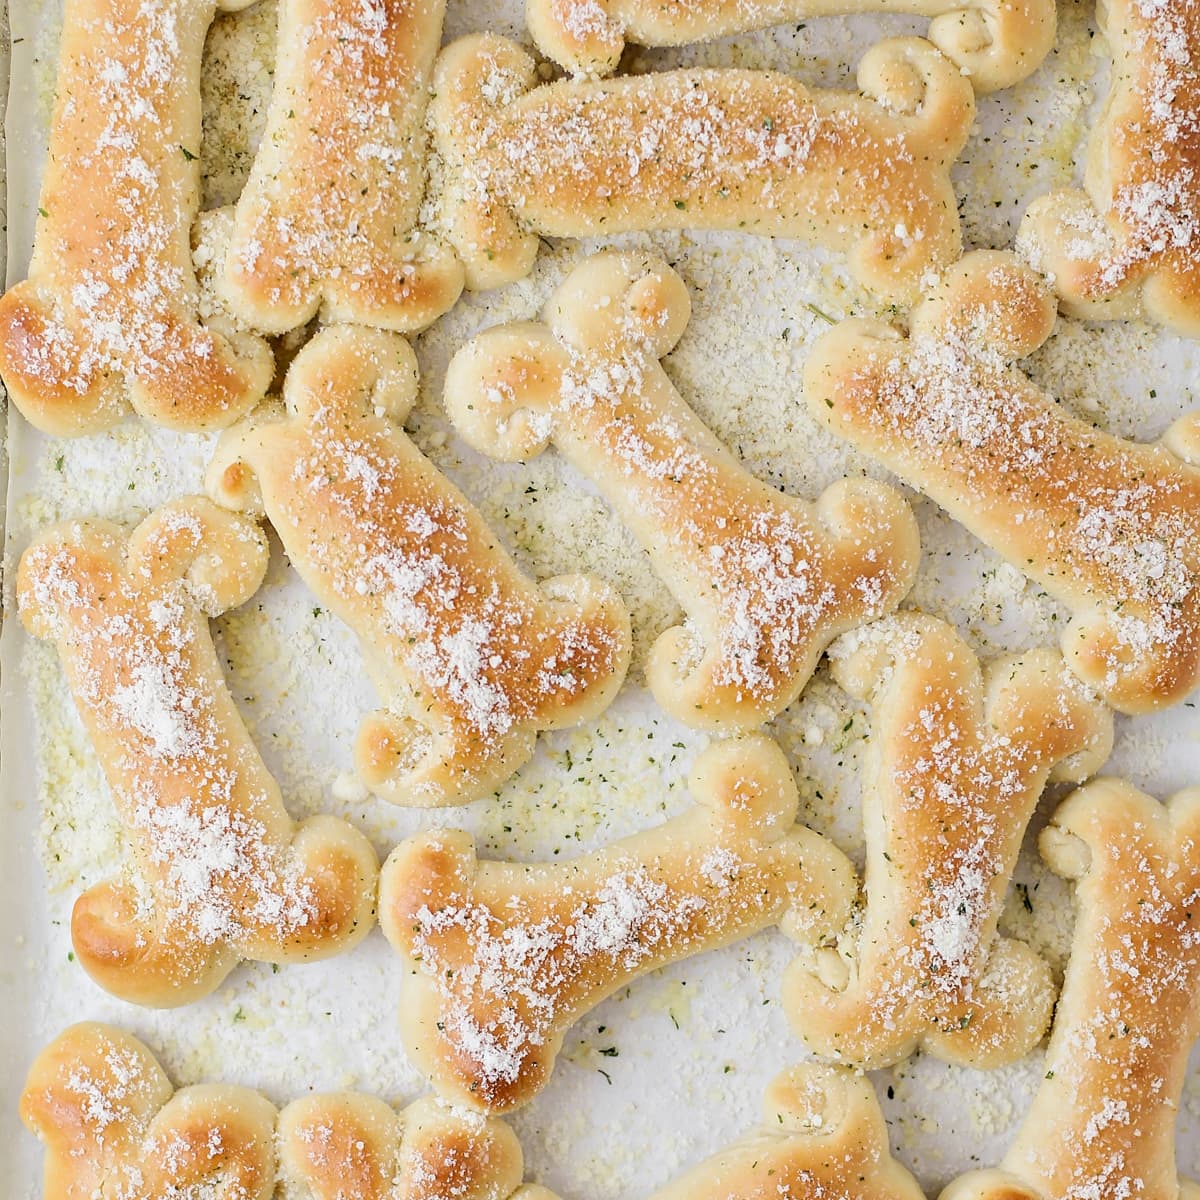 Several breadsticks on a baking sheet sprinkled with parmesan cheese.